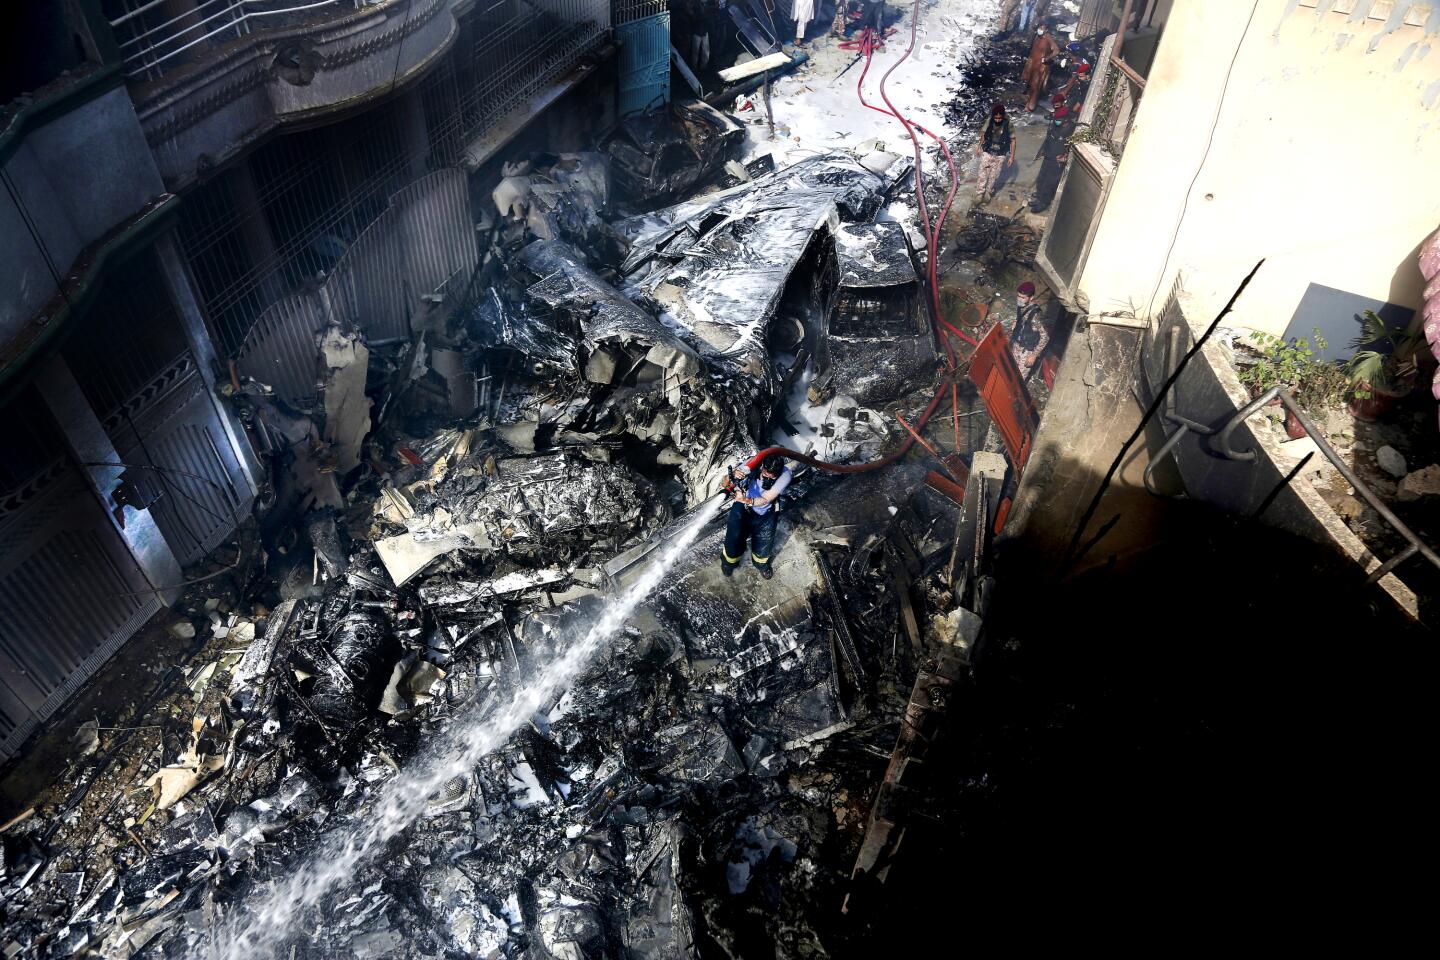 Firefighters hose down the debris caused by the crash of a Pakistani airliner in a neighborhood in Karachi on Friday.